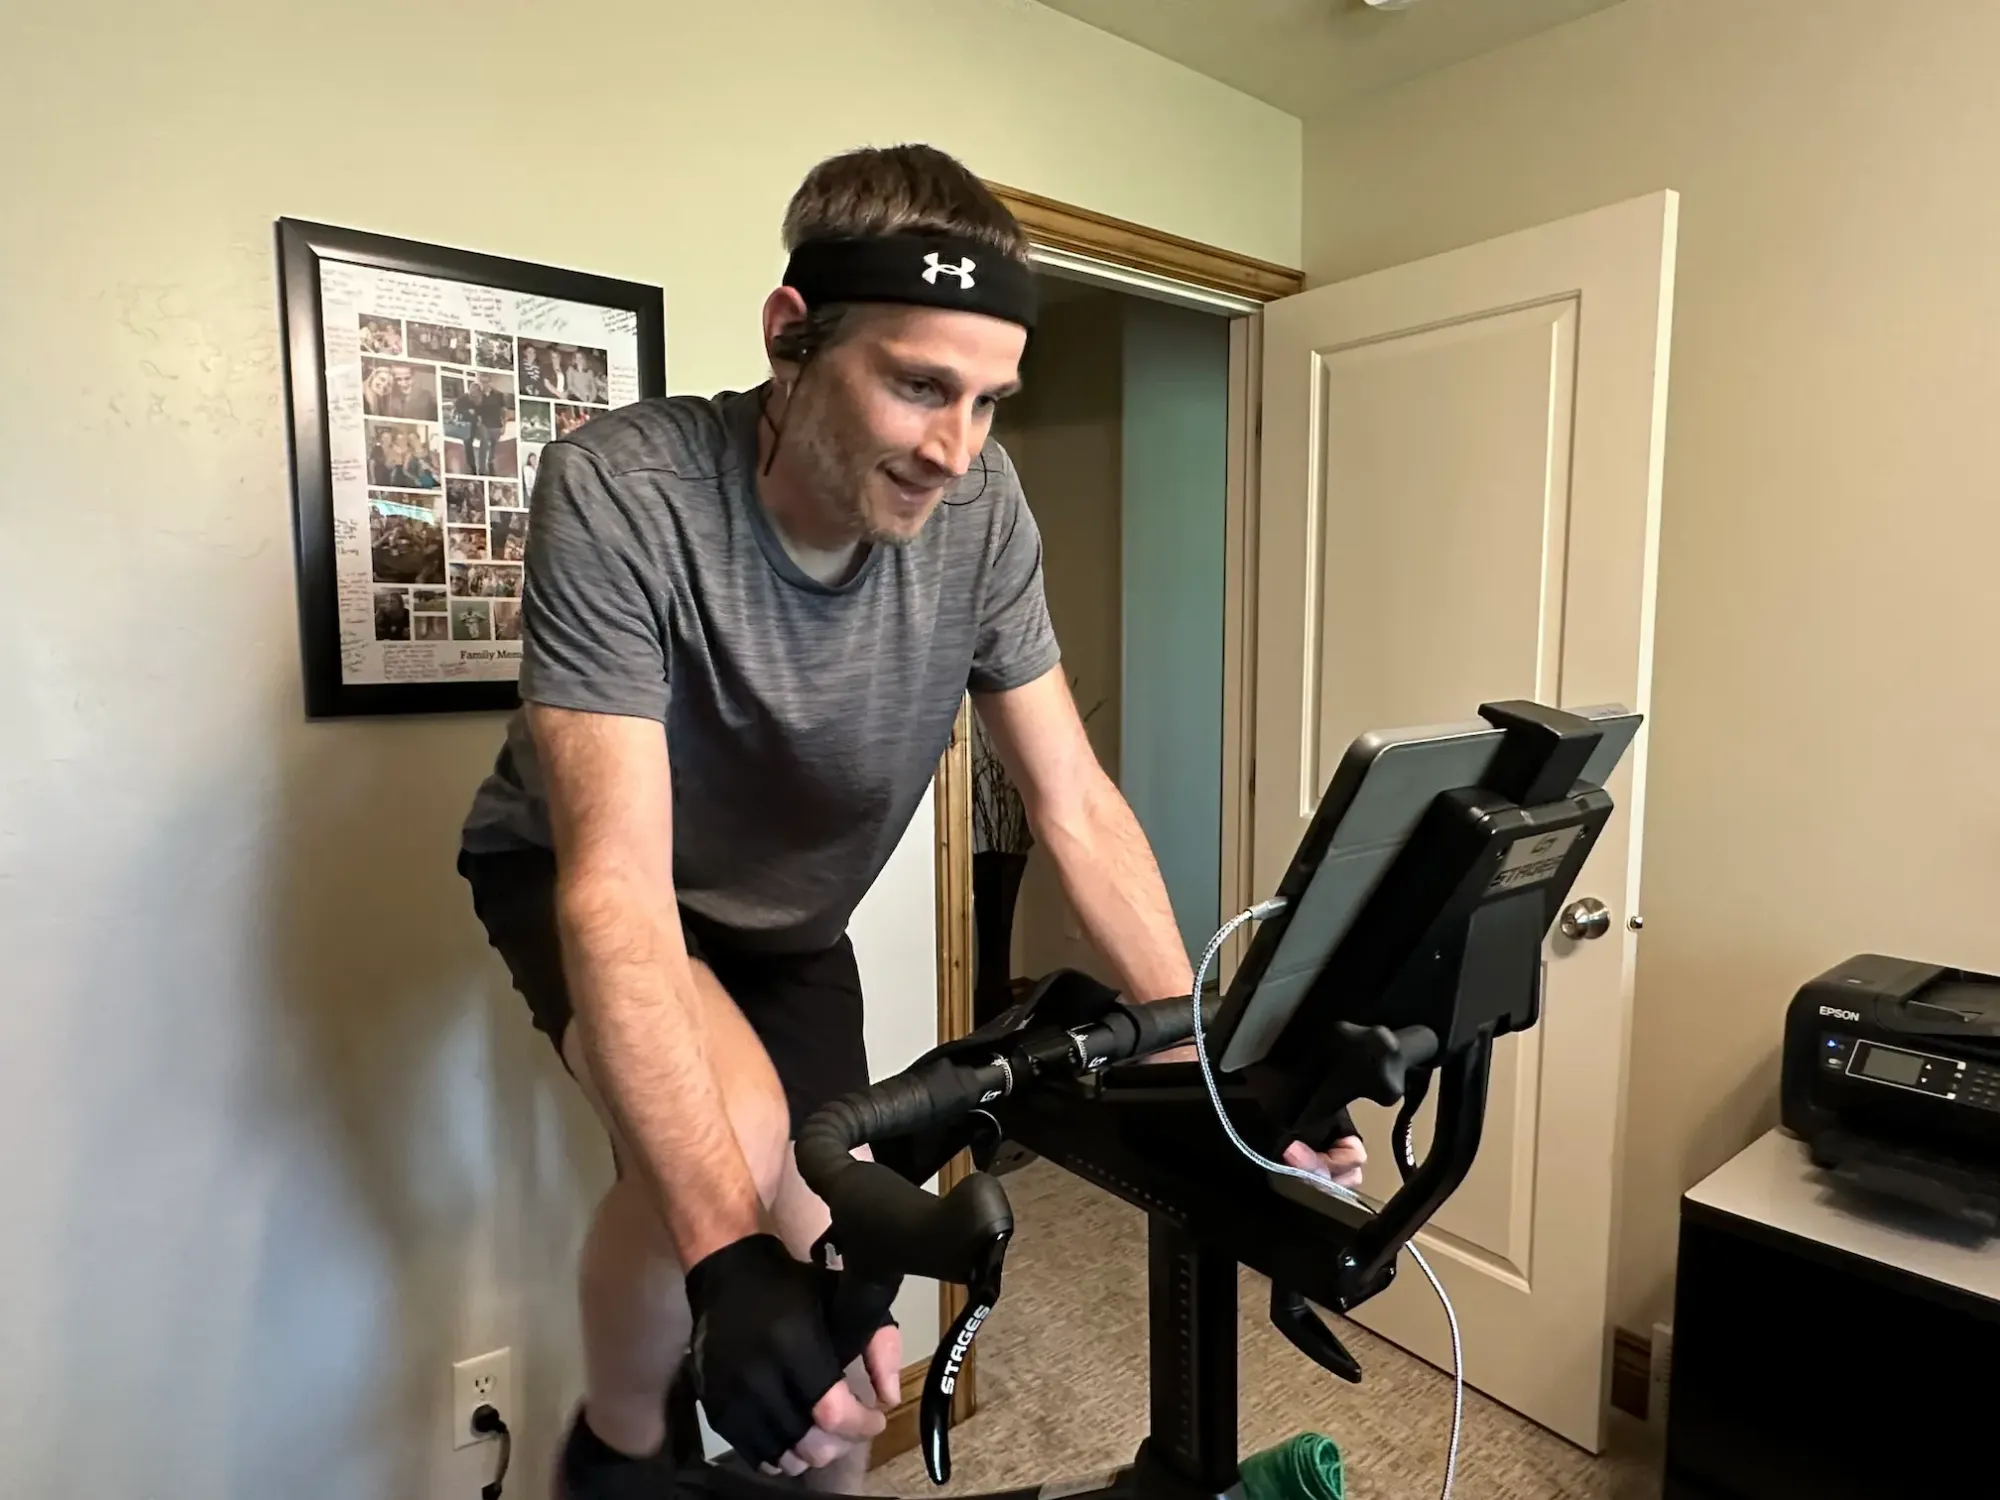 Keith is training hard on his Stages SB20 Smart Bike indoor trainer